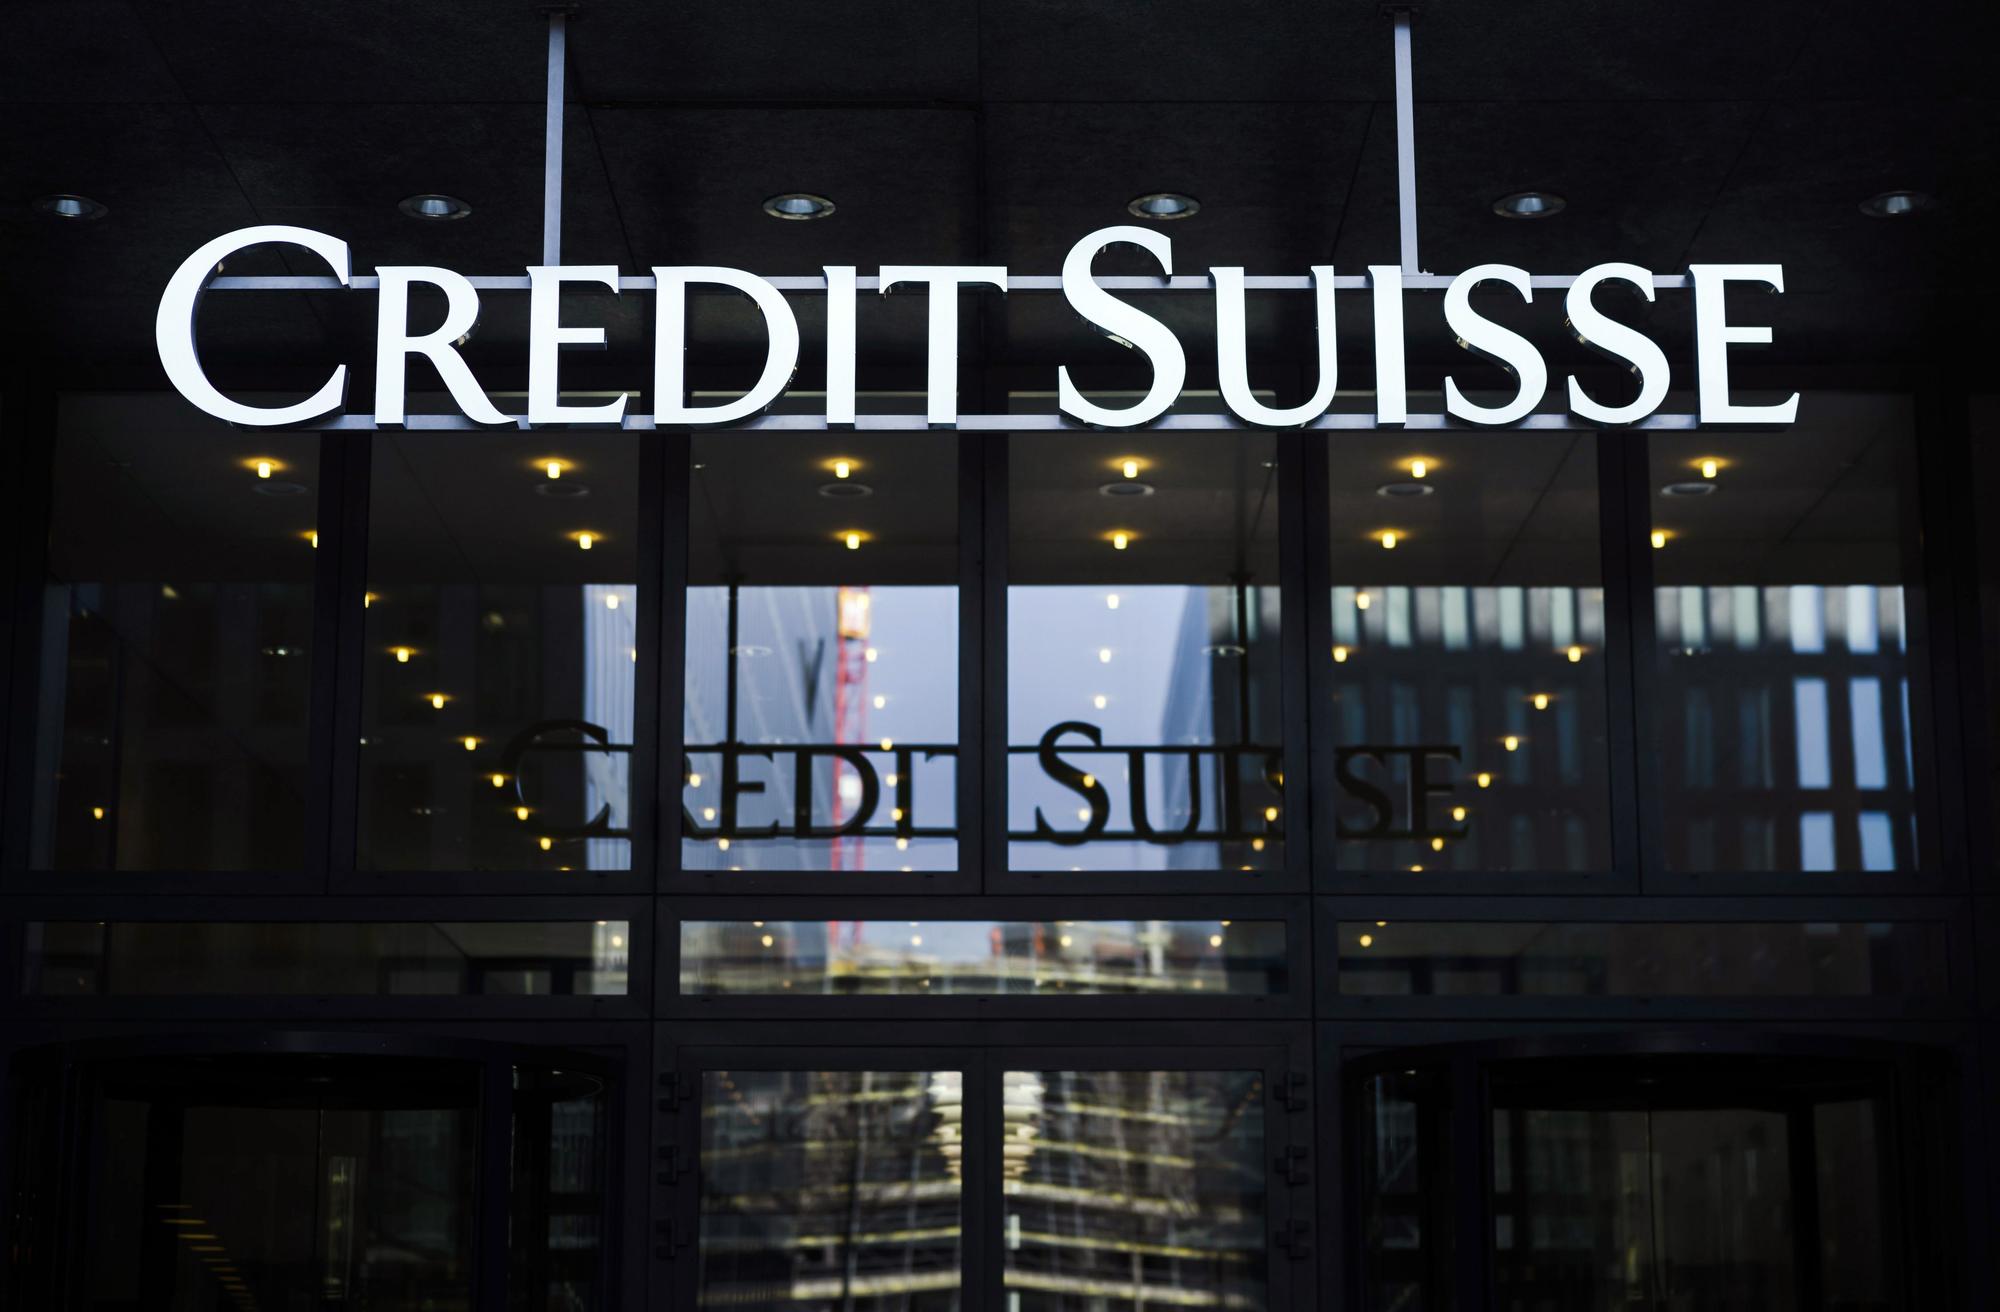 Credit Suisse to get up to 50 billion francs from the Swiss National Bank (SNB)